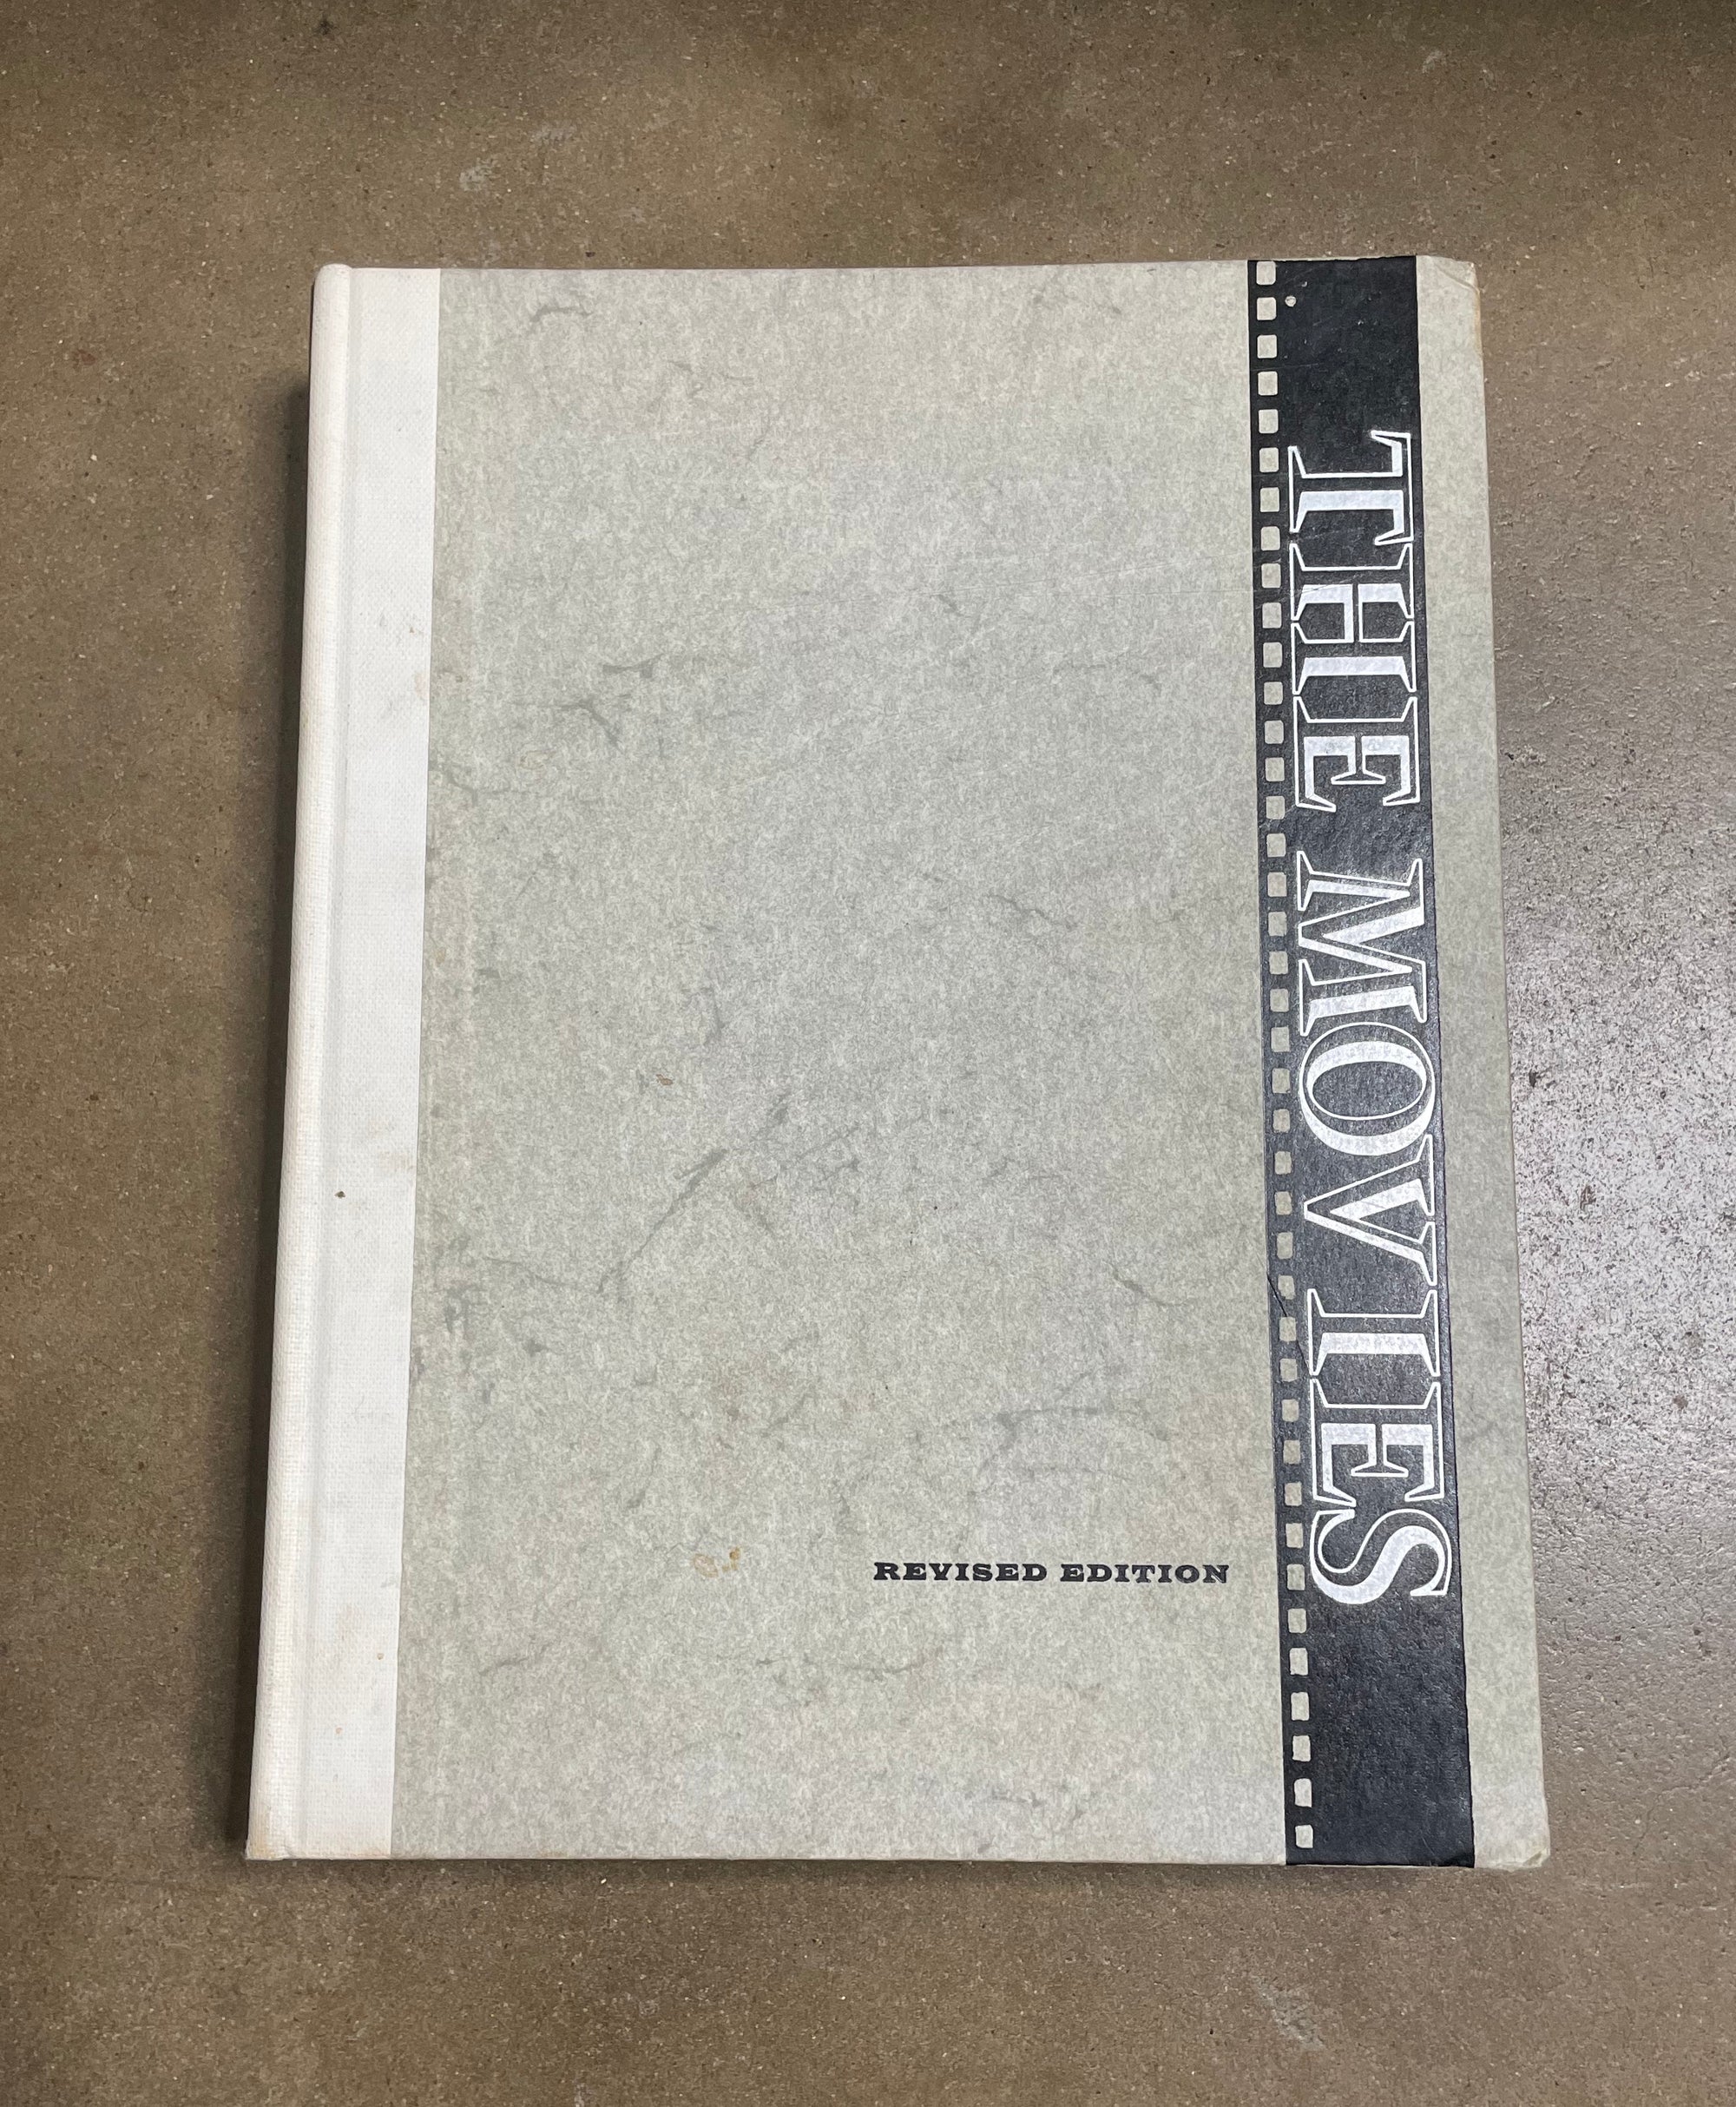 Vintage "The Movies" Book